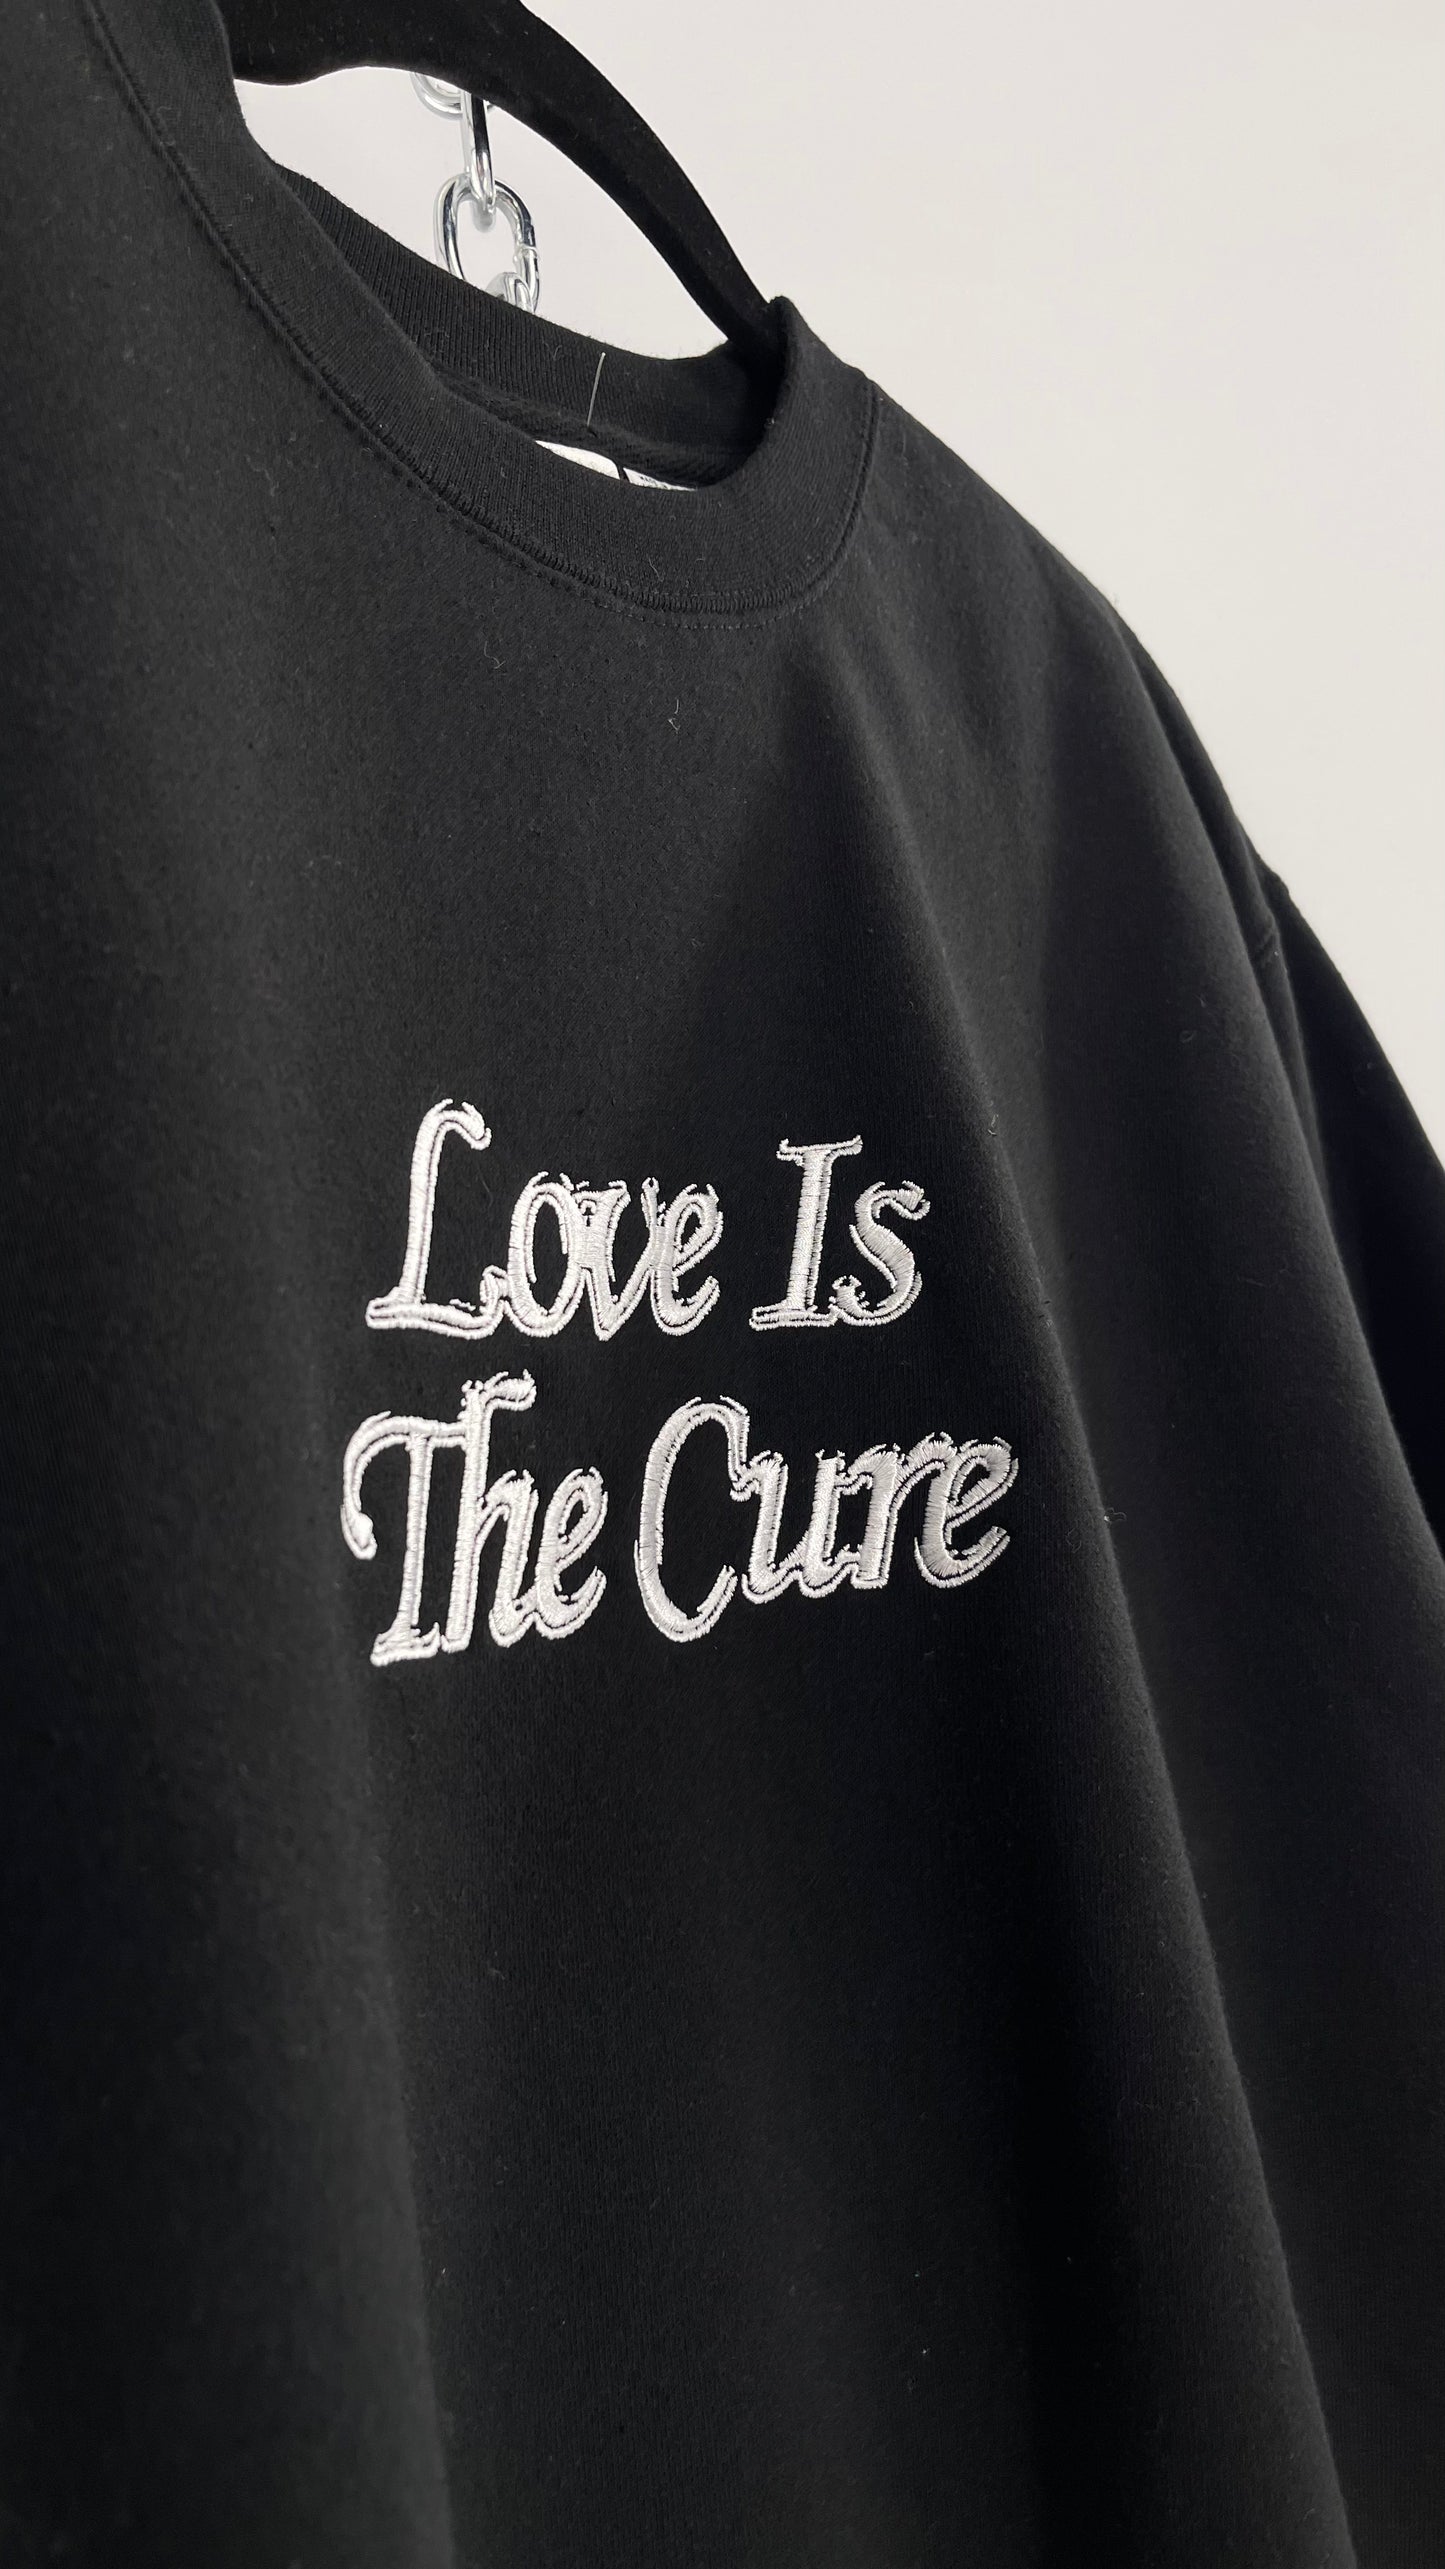 OBEY Black All Over Embroidered Love is The Cure Crewneck with Tags (Medium)